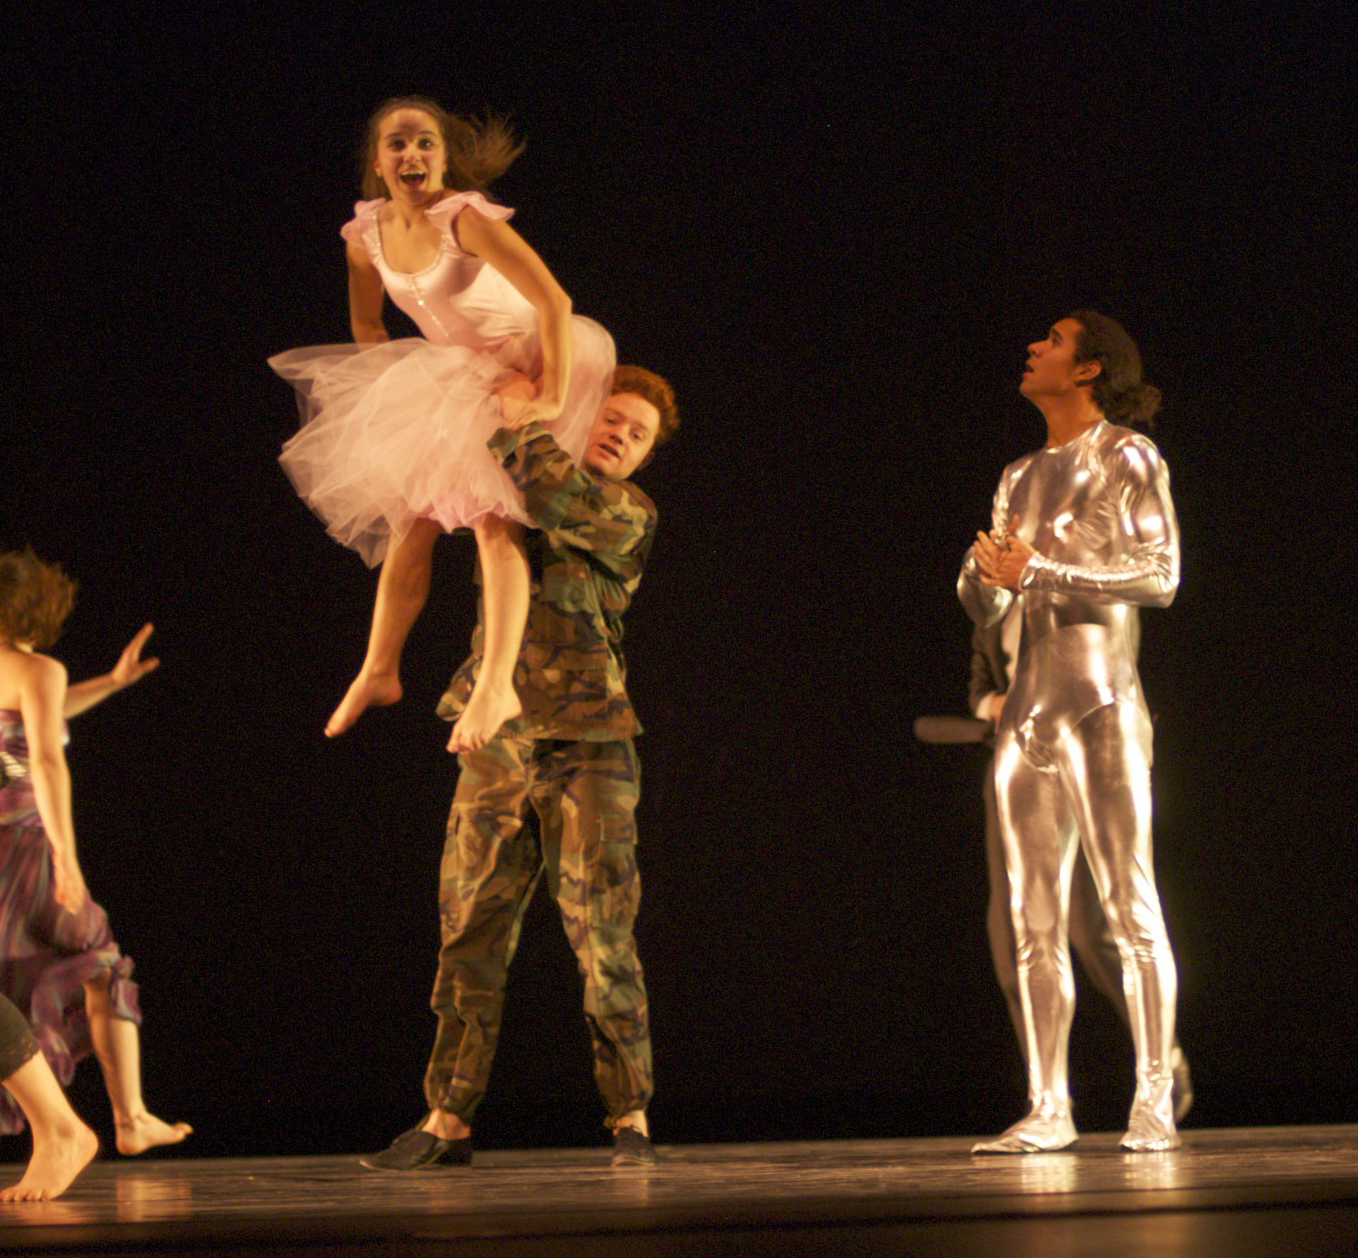 2007 Faculty Dance Concert: Moving, Choreography by Daniel Joeck <span class="cc-gallery-credit"></span>